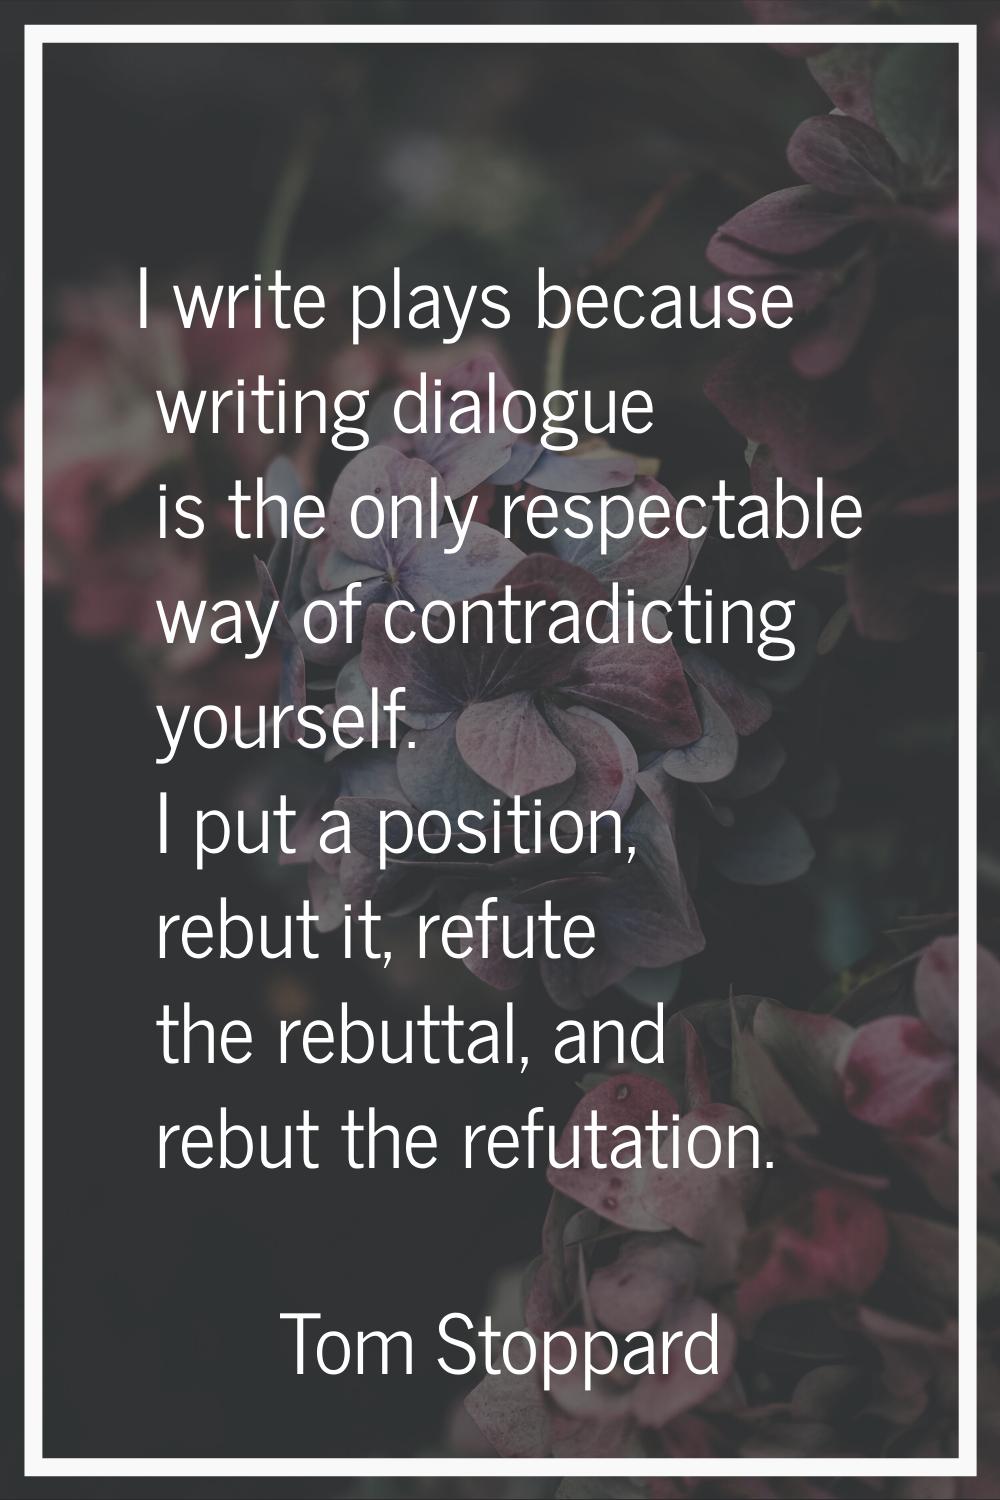 I write plays because writing dialogue is the only respectable way of contradicting yourself. I put